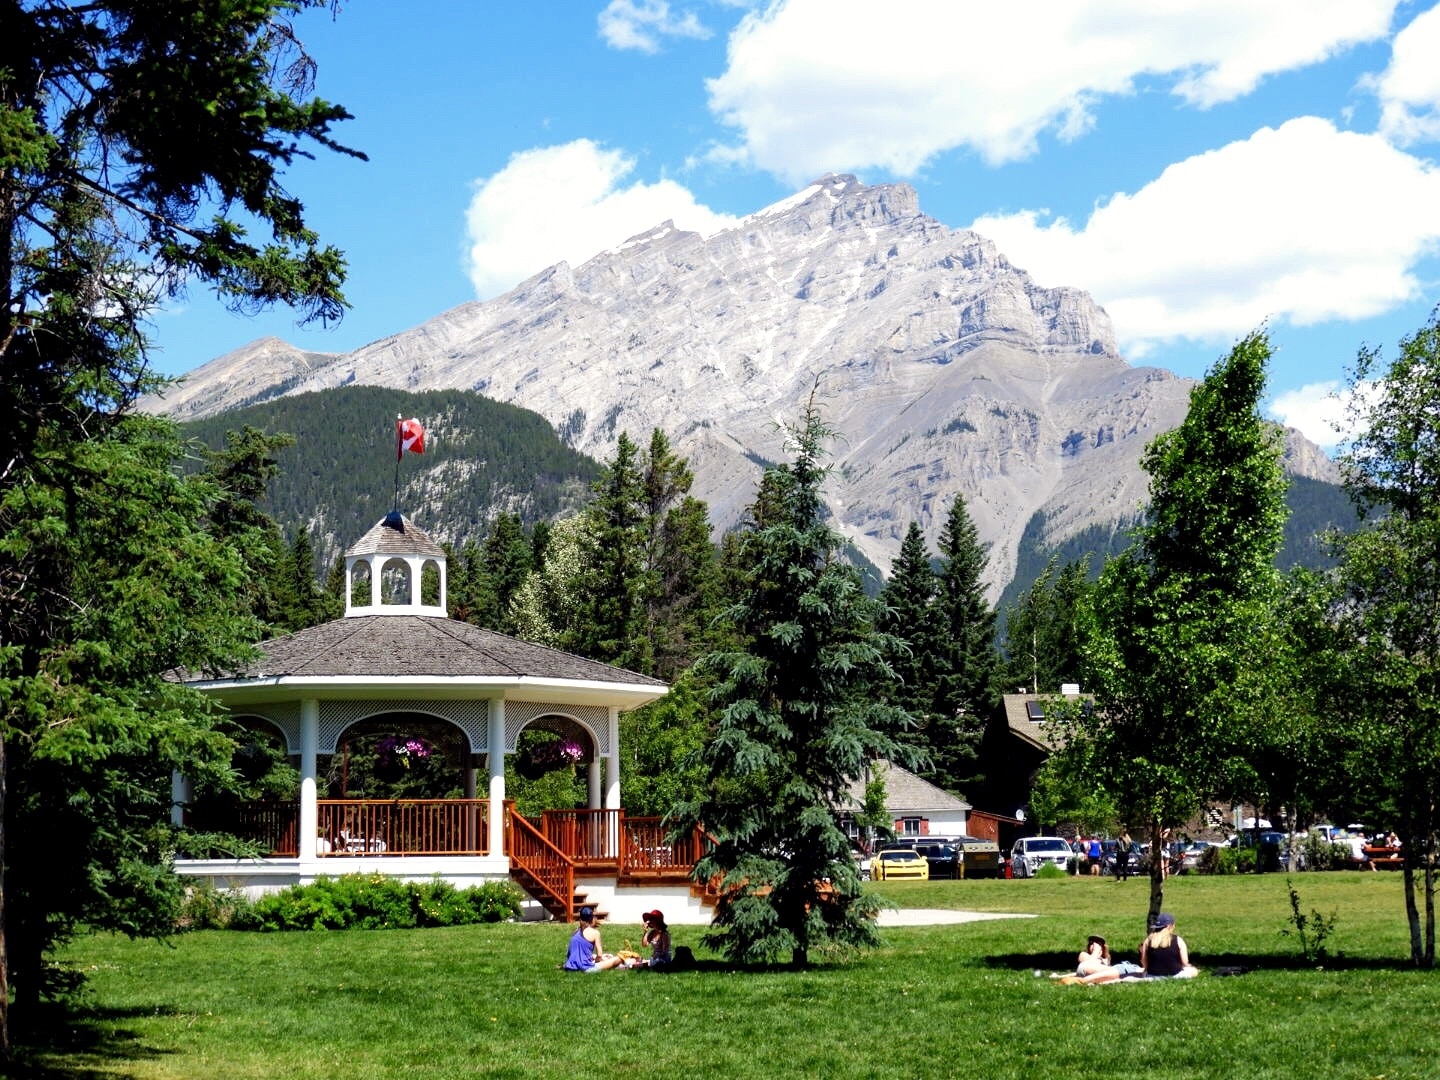 An idyllic setting with a beautiful backdrop, the Central Park in Banff located along the bow river is a perfect place to spend time after a hearty meal in one of the many restaurants in downtown Banff.  Beware of the mosquitoes though.  